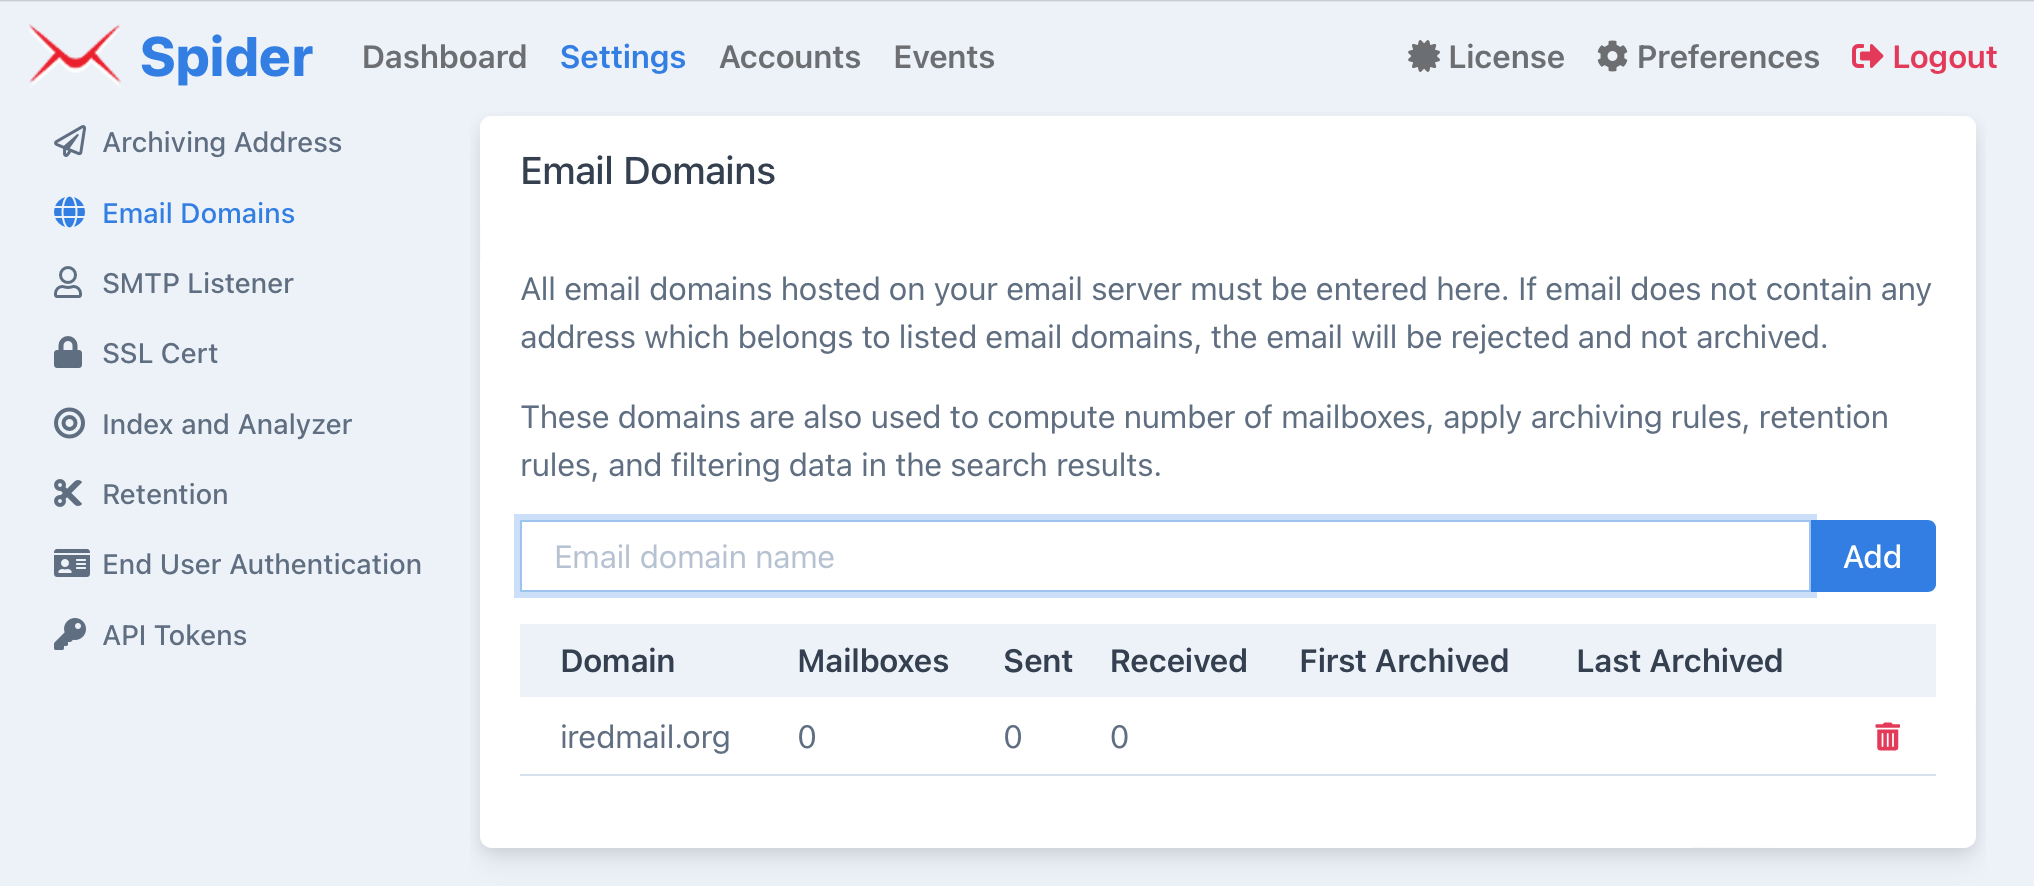 Email Domains